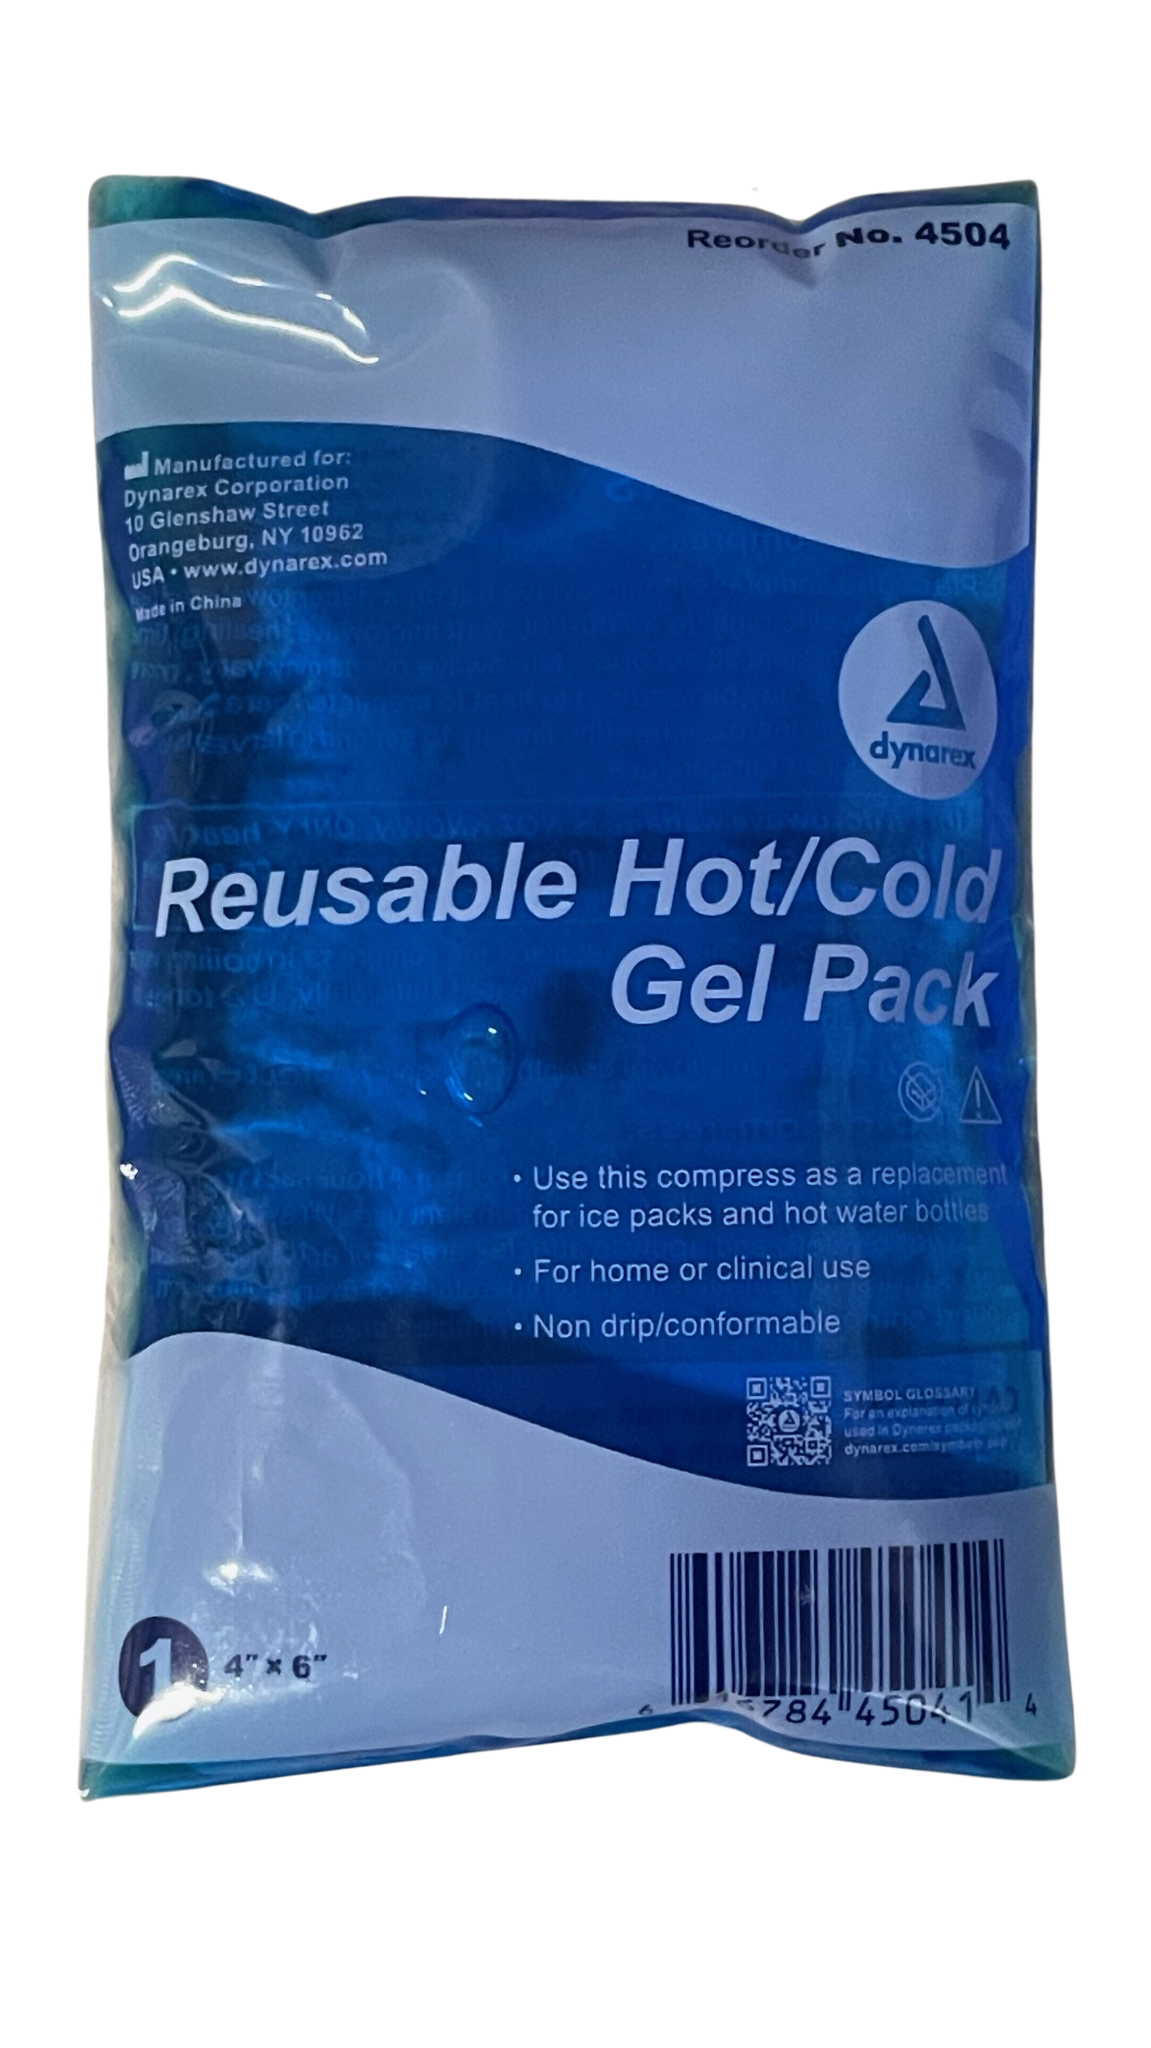 Perineal Instant Cold Pack w/ Self Adhesive Strip Dynarex Corporation